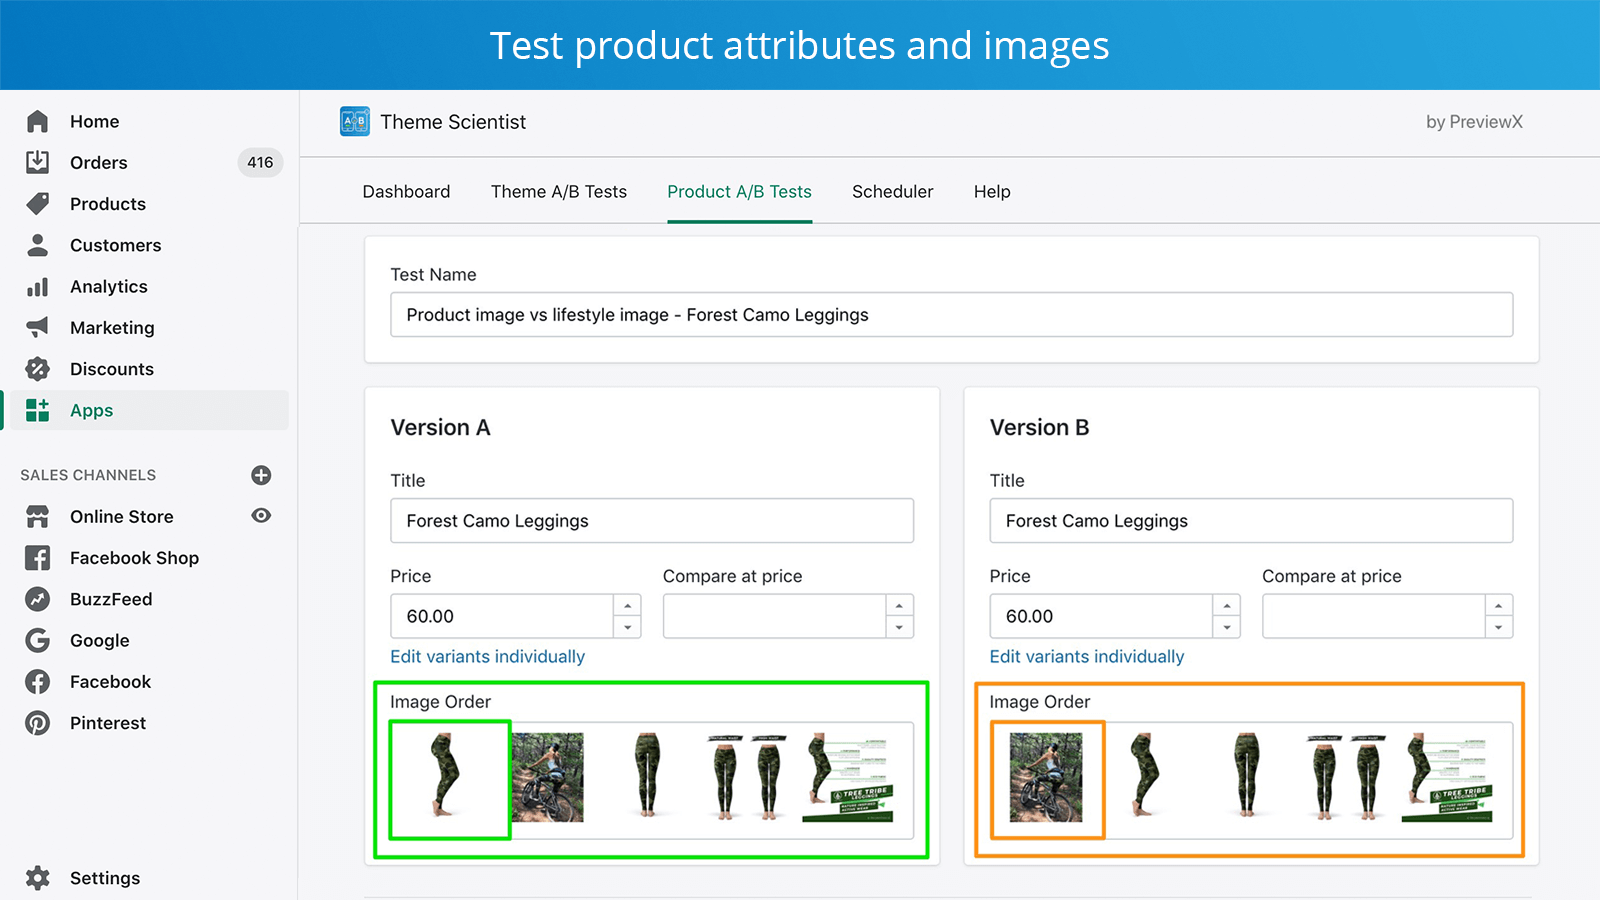 Test product attributes and images